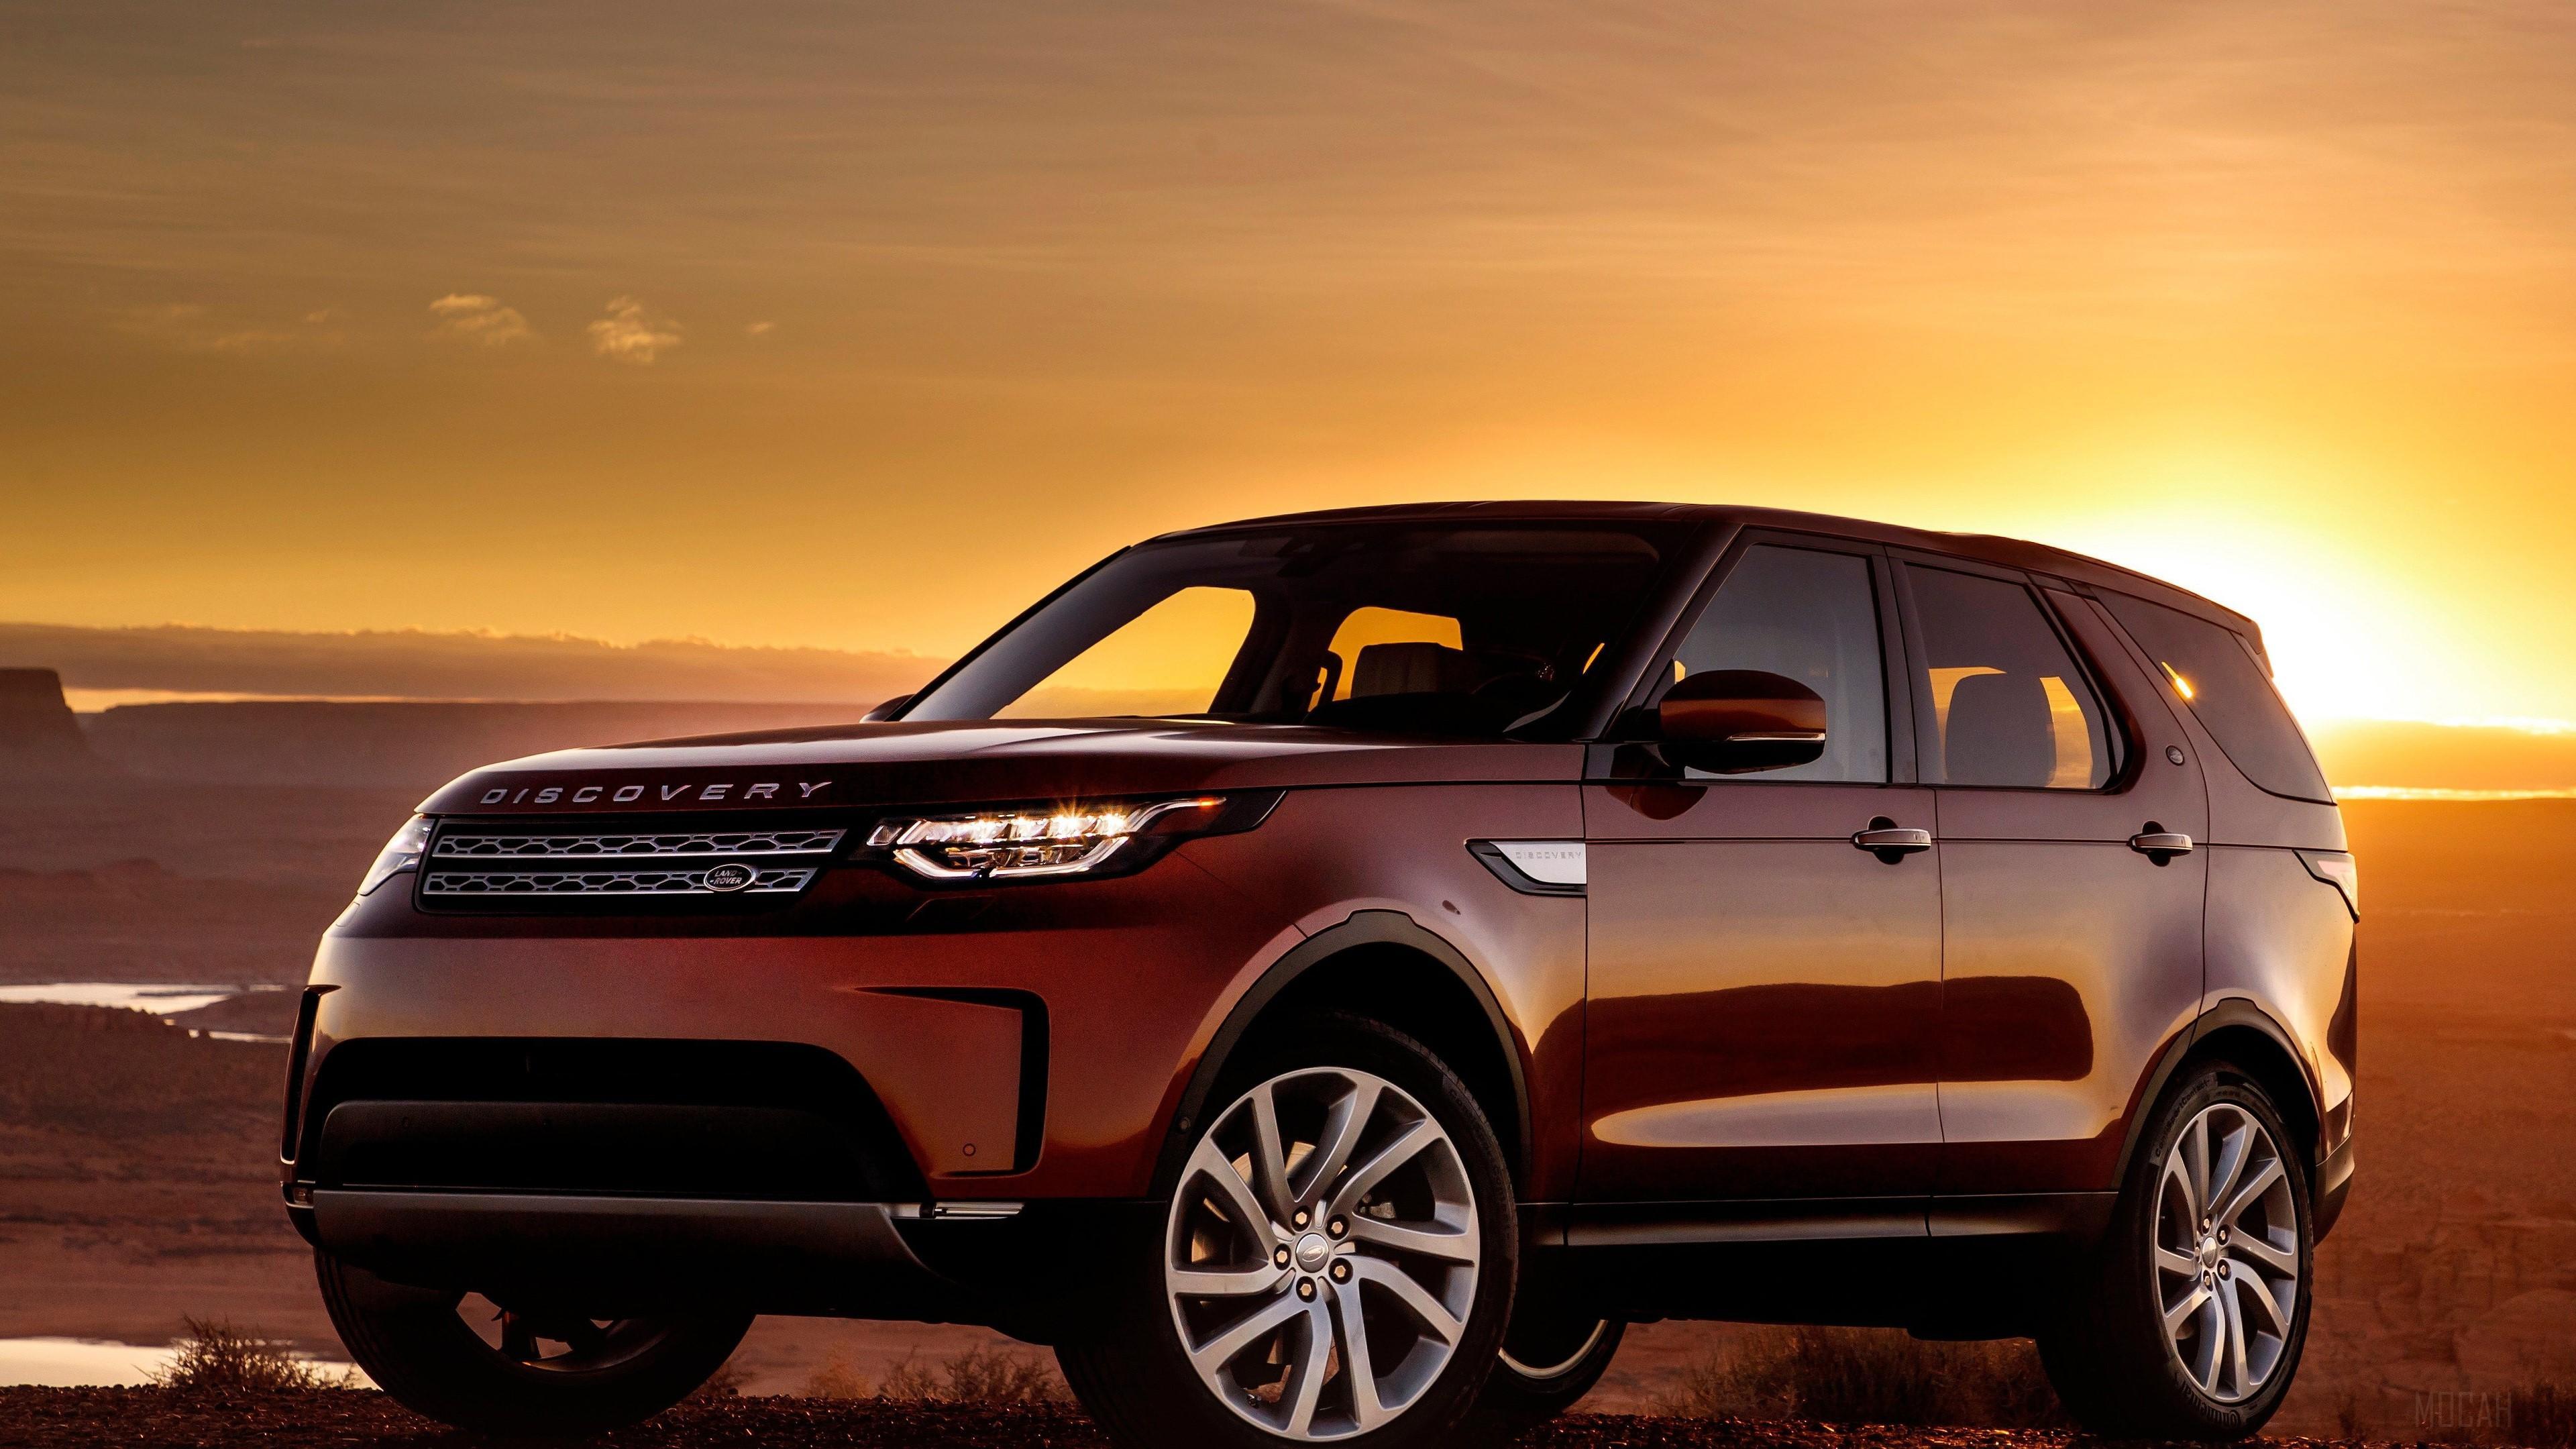 HD wallpaper, 2017 Land Rover Discovery 4K